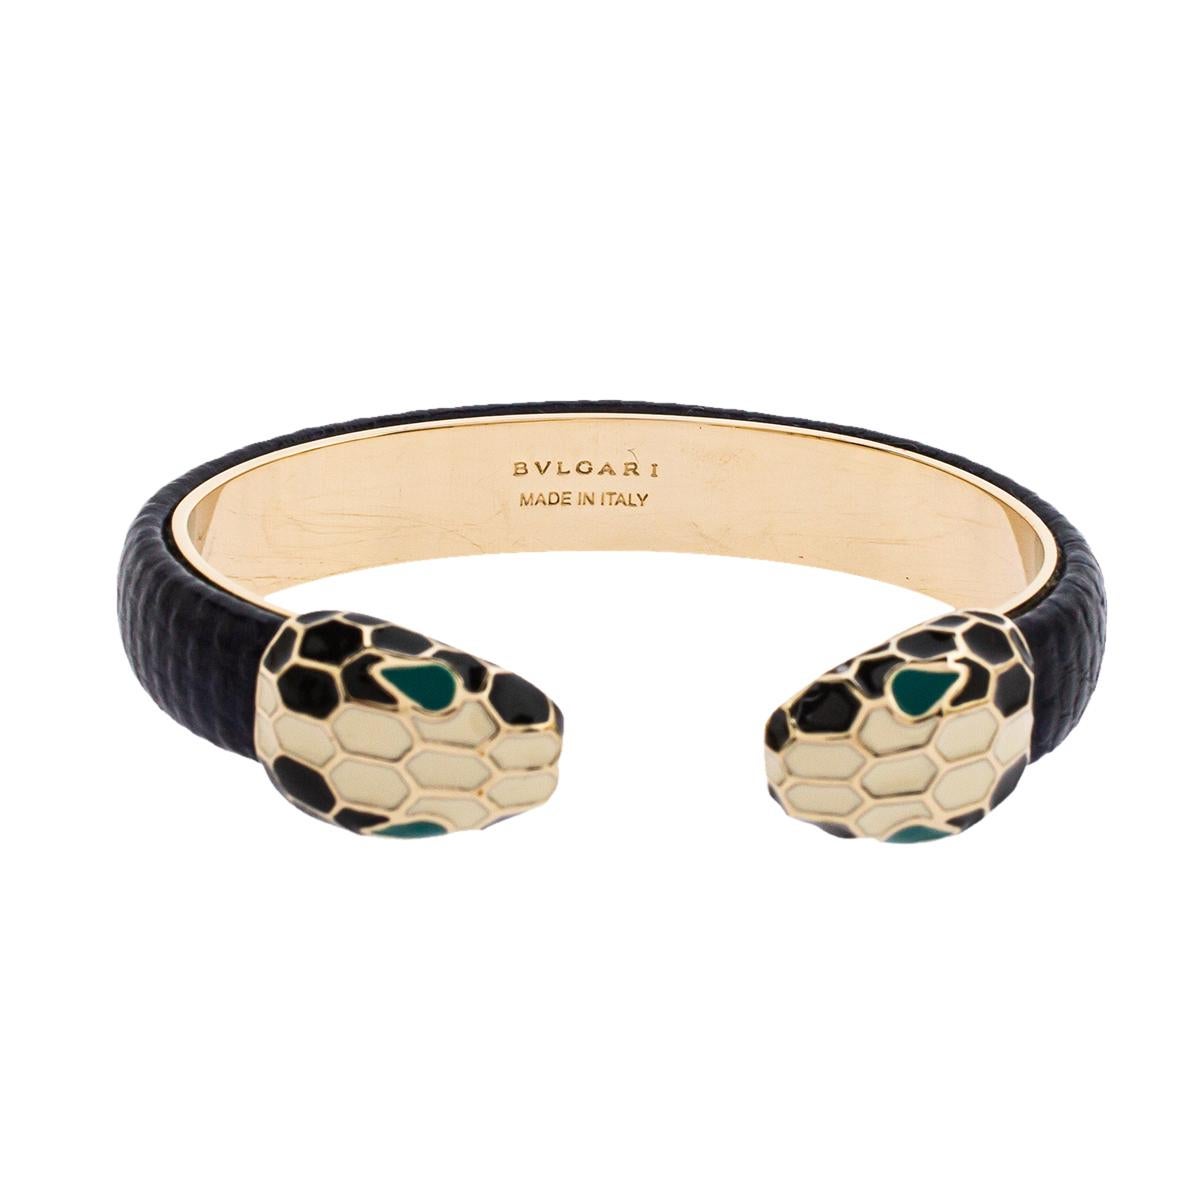 BVLGARI - Serpenti Forever leather and yellow gold-plated brass bracelet |  Selfridges.com